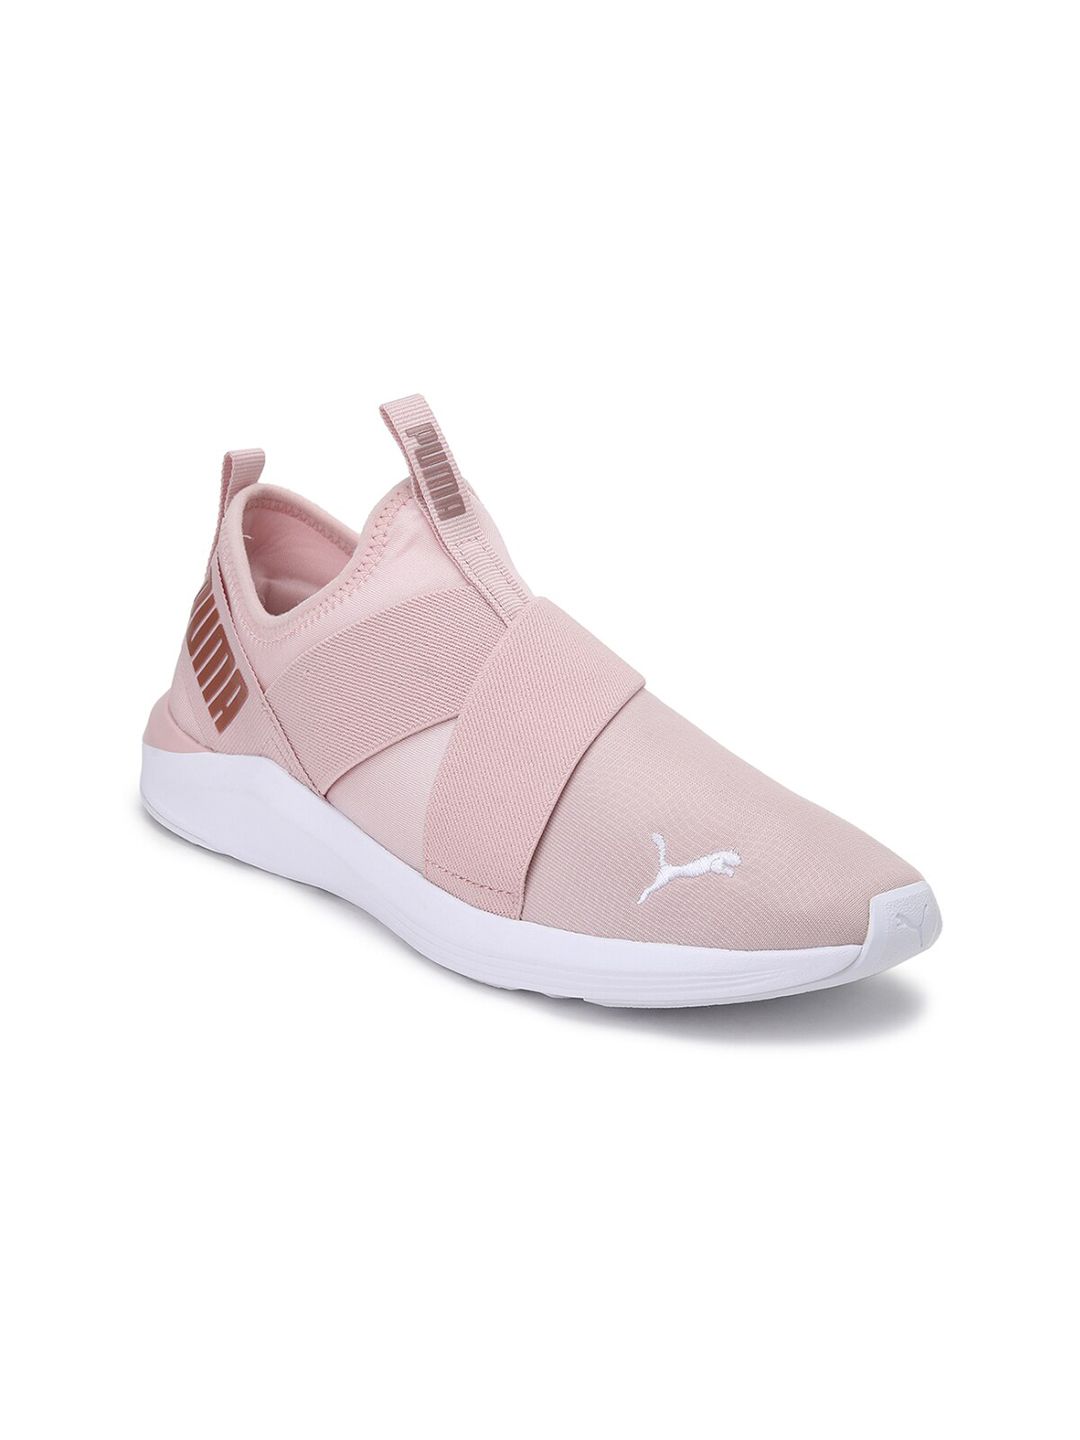 Puma Women Pink Mesh Training or Gym Shoes Price in India